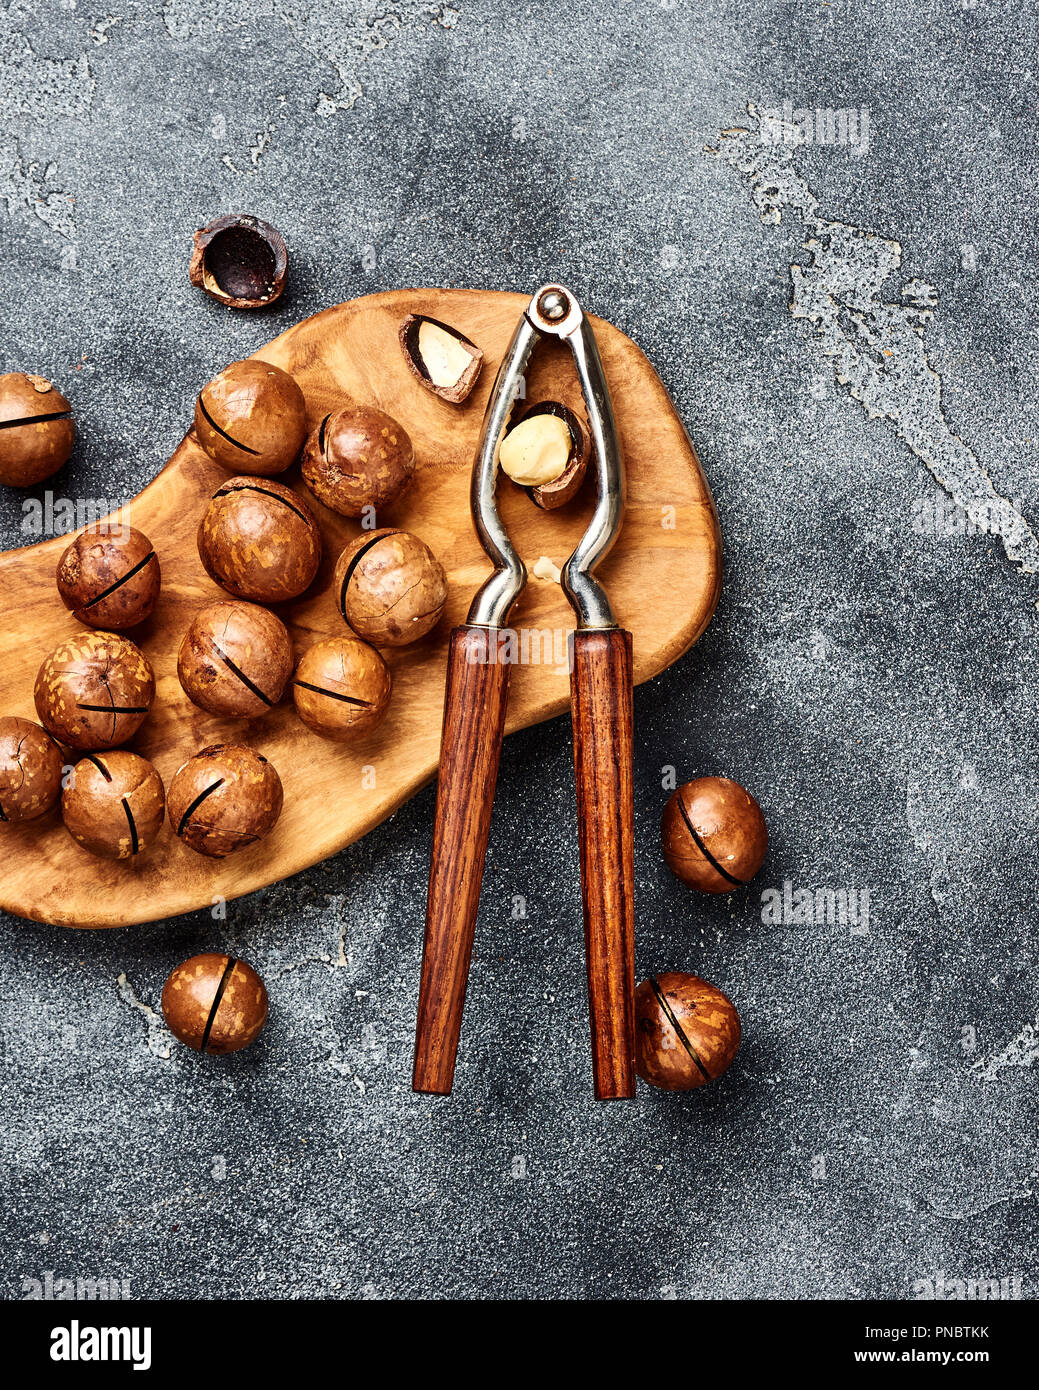 Unshelled macadamia nuts on gray background. Top view. Stock Photo